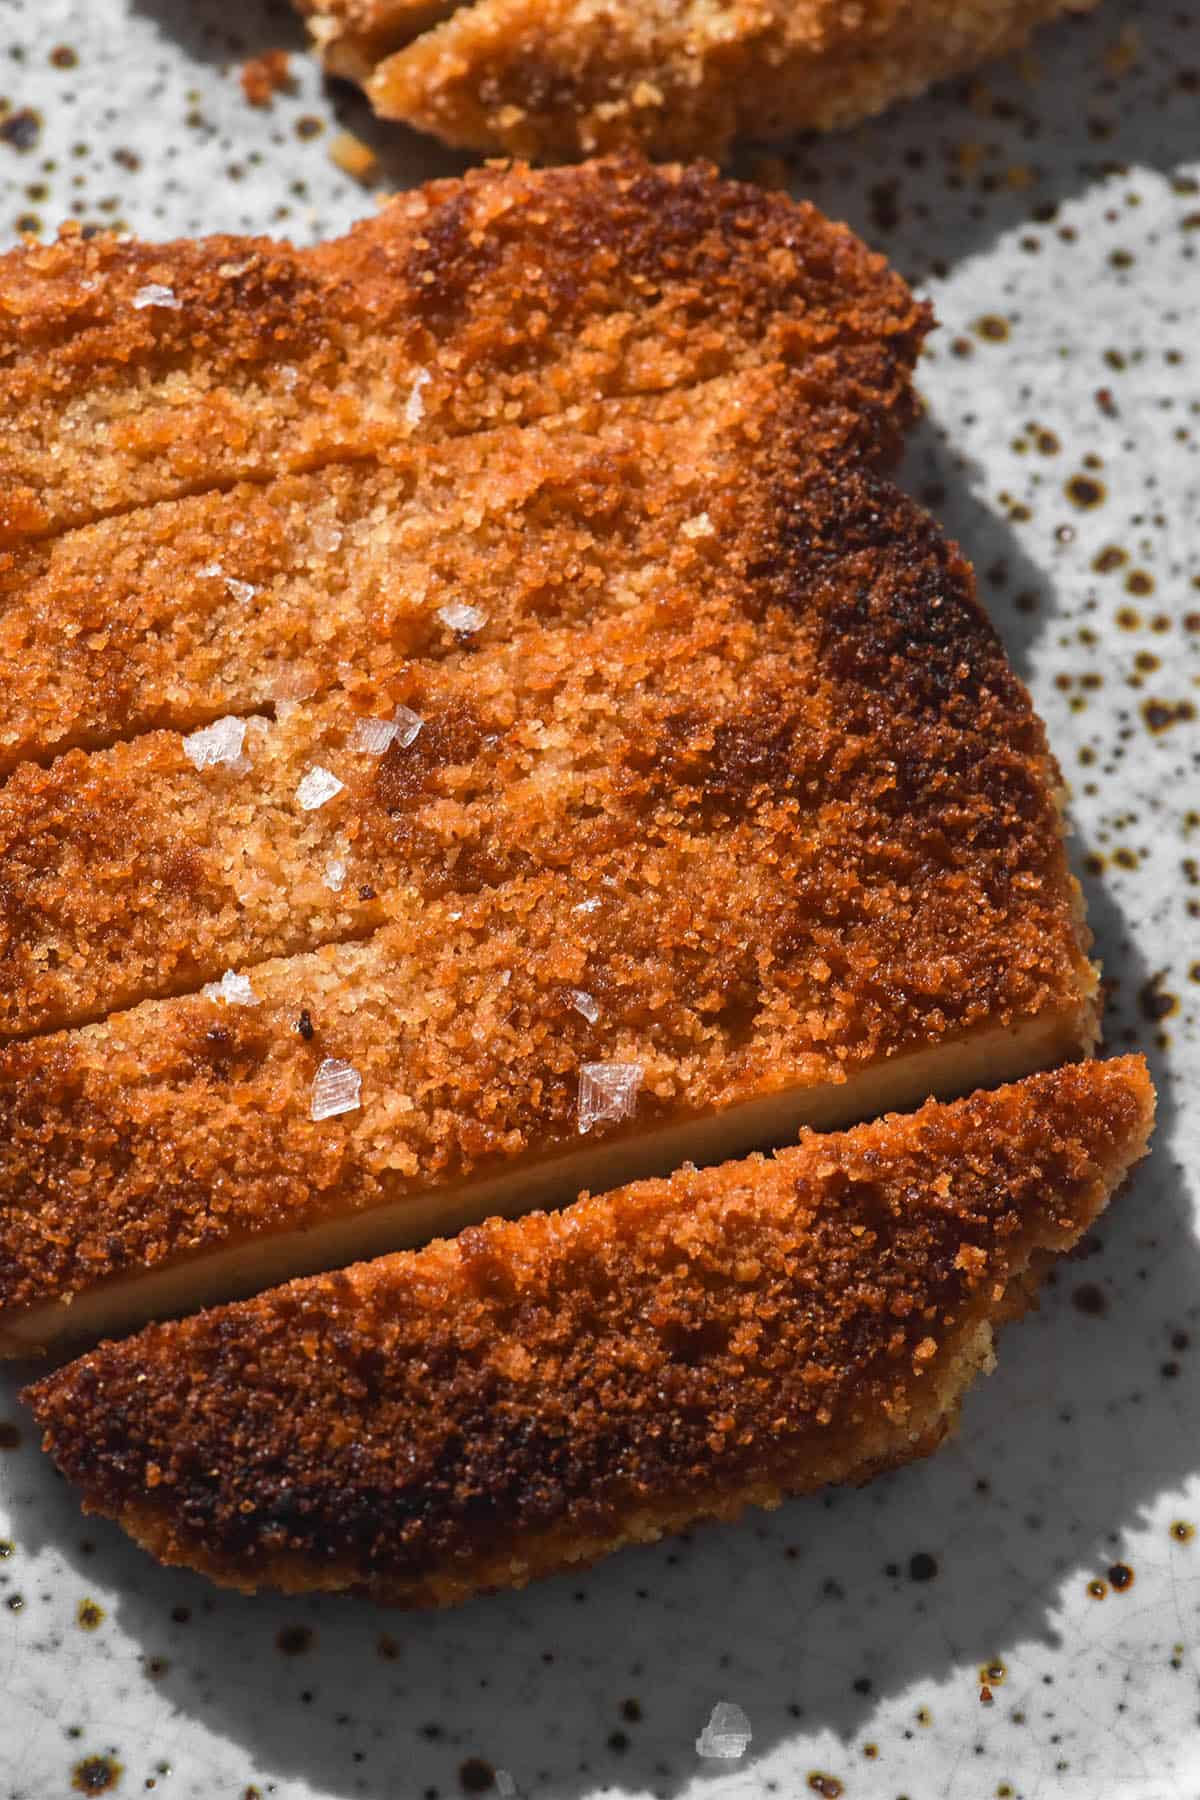 A close up aerial image of a gluten free vegan schnitzel that has been sliced and topped with some sea salt flakes. The schnitzel sits atop a white speckled ceramic plate in bright lighting. 